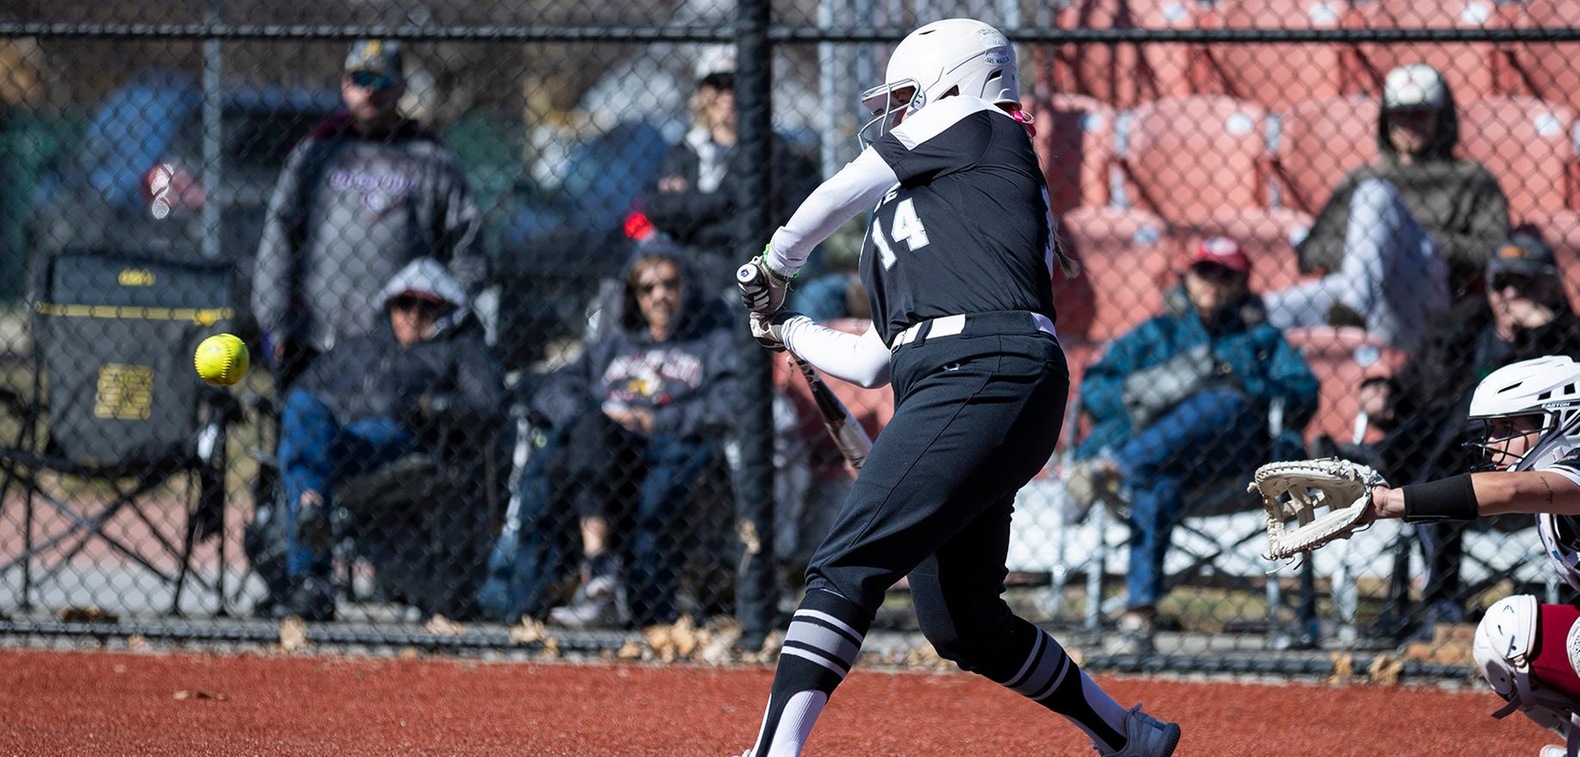 Katie Cunningham got the win in the opener and went 7-for-10 at the plate with seven RBIs.